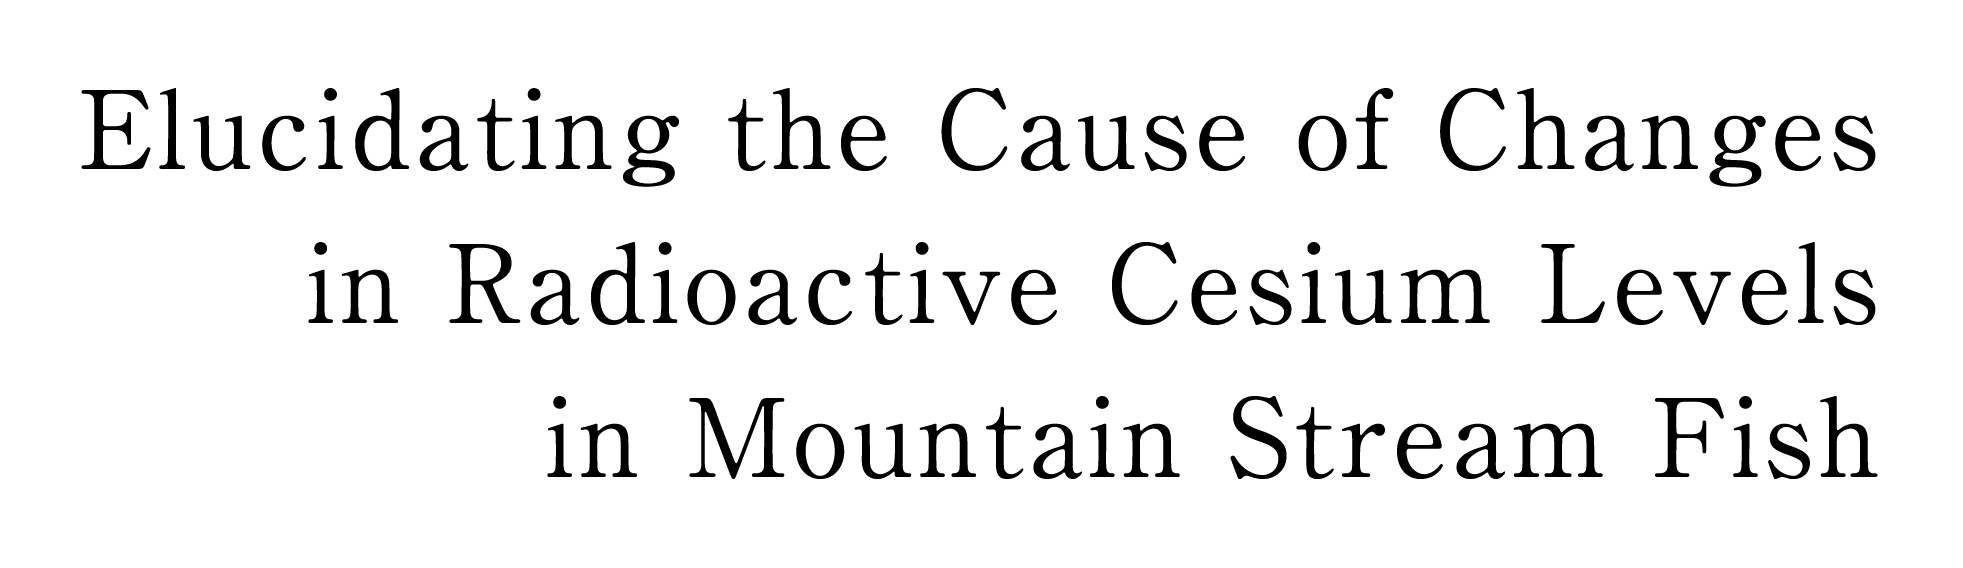 Elucidating the Cause of Changes in Radioactive Cesium Levels in Mountain Stream Fish